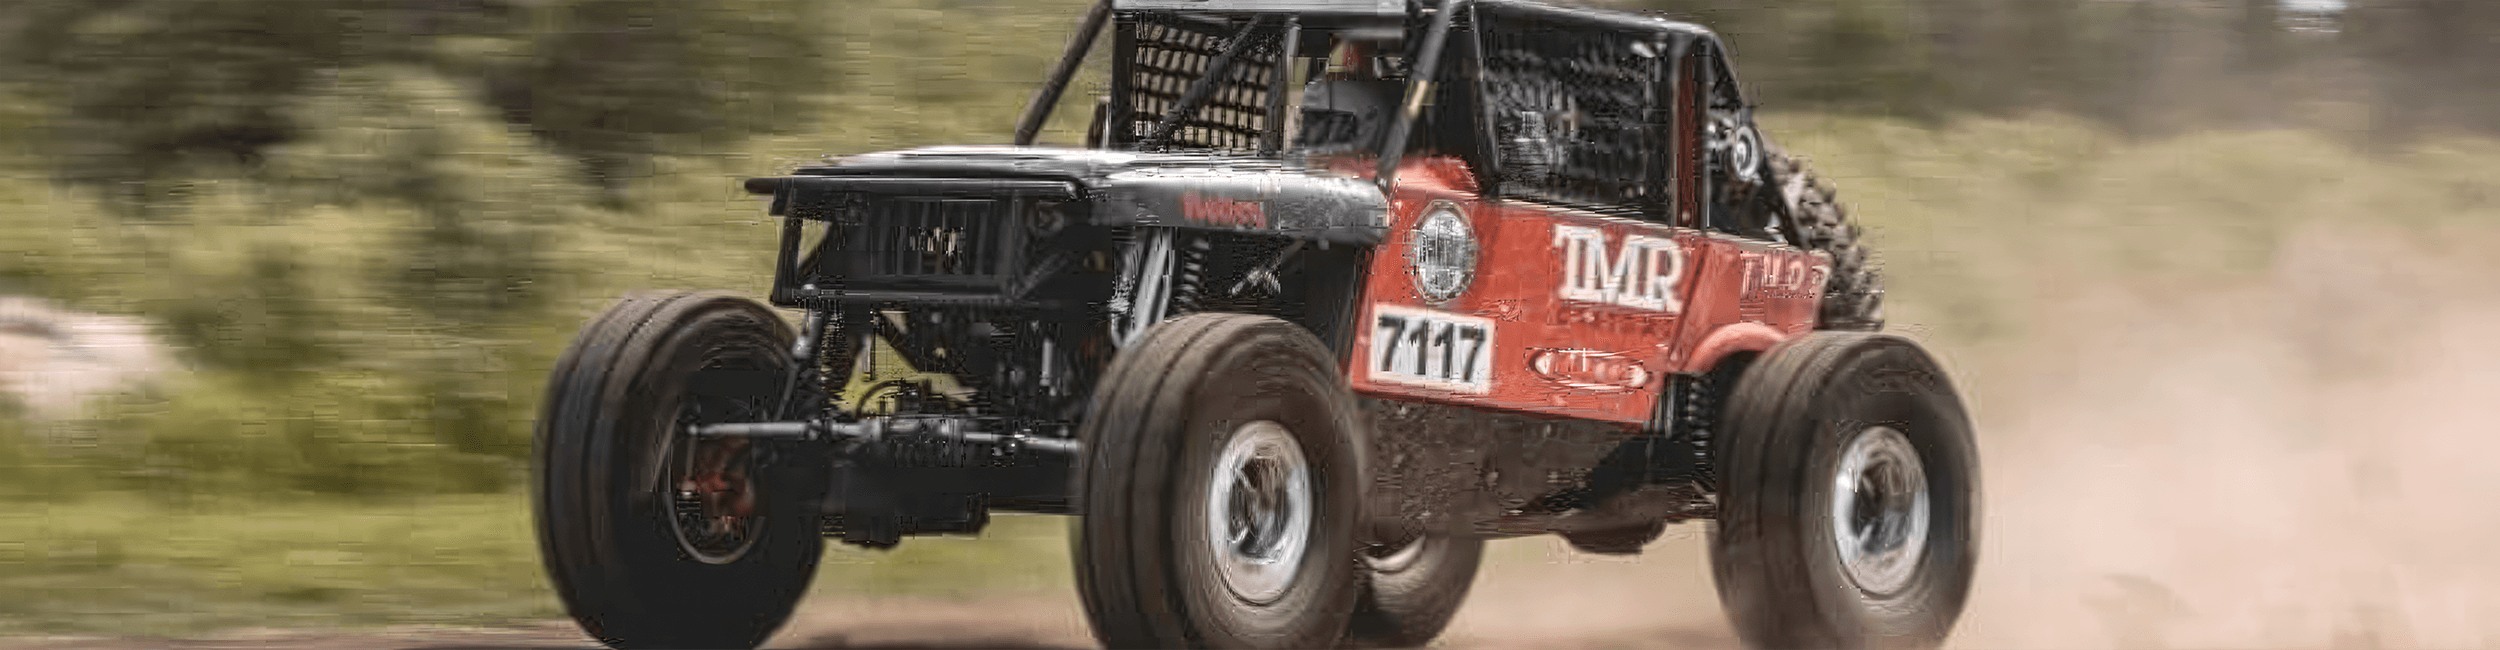 Thor Motorsports off-road vehicle powered by BluePrint Engines